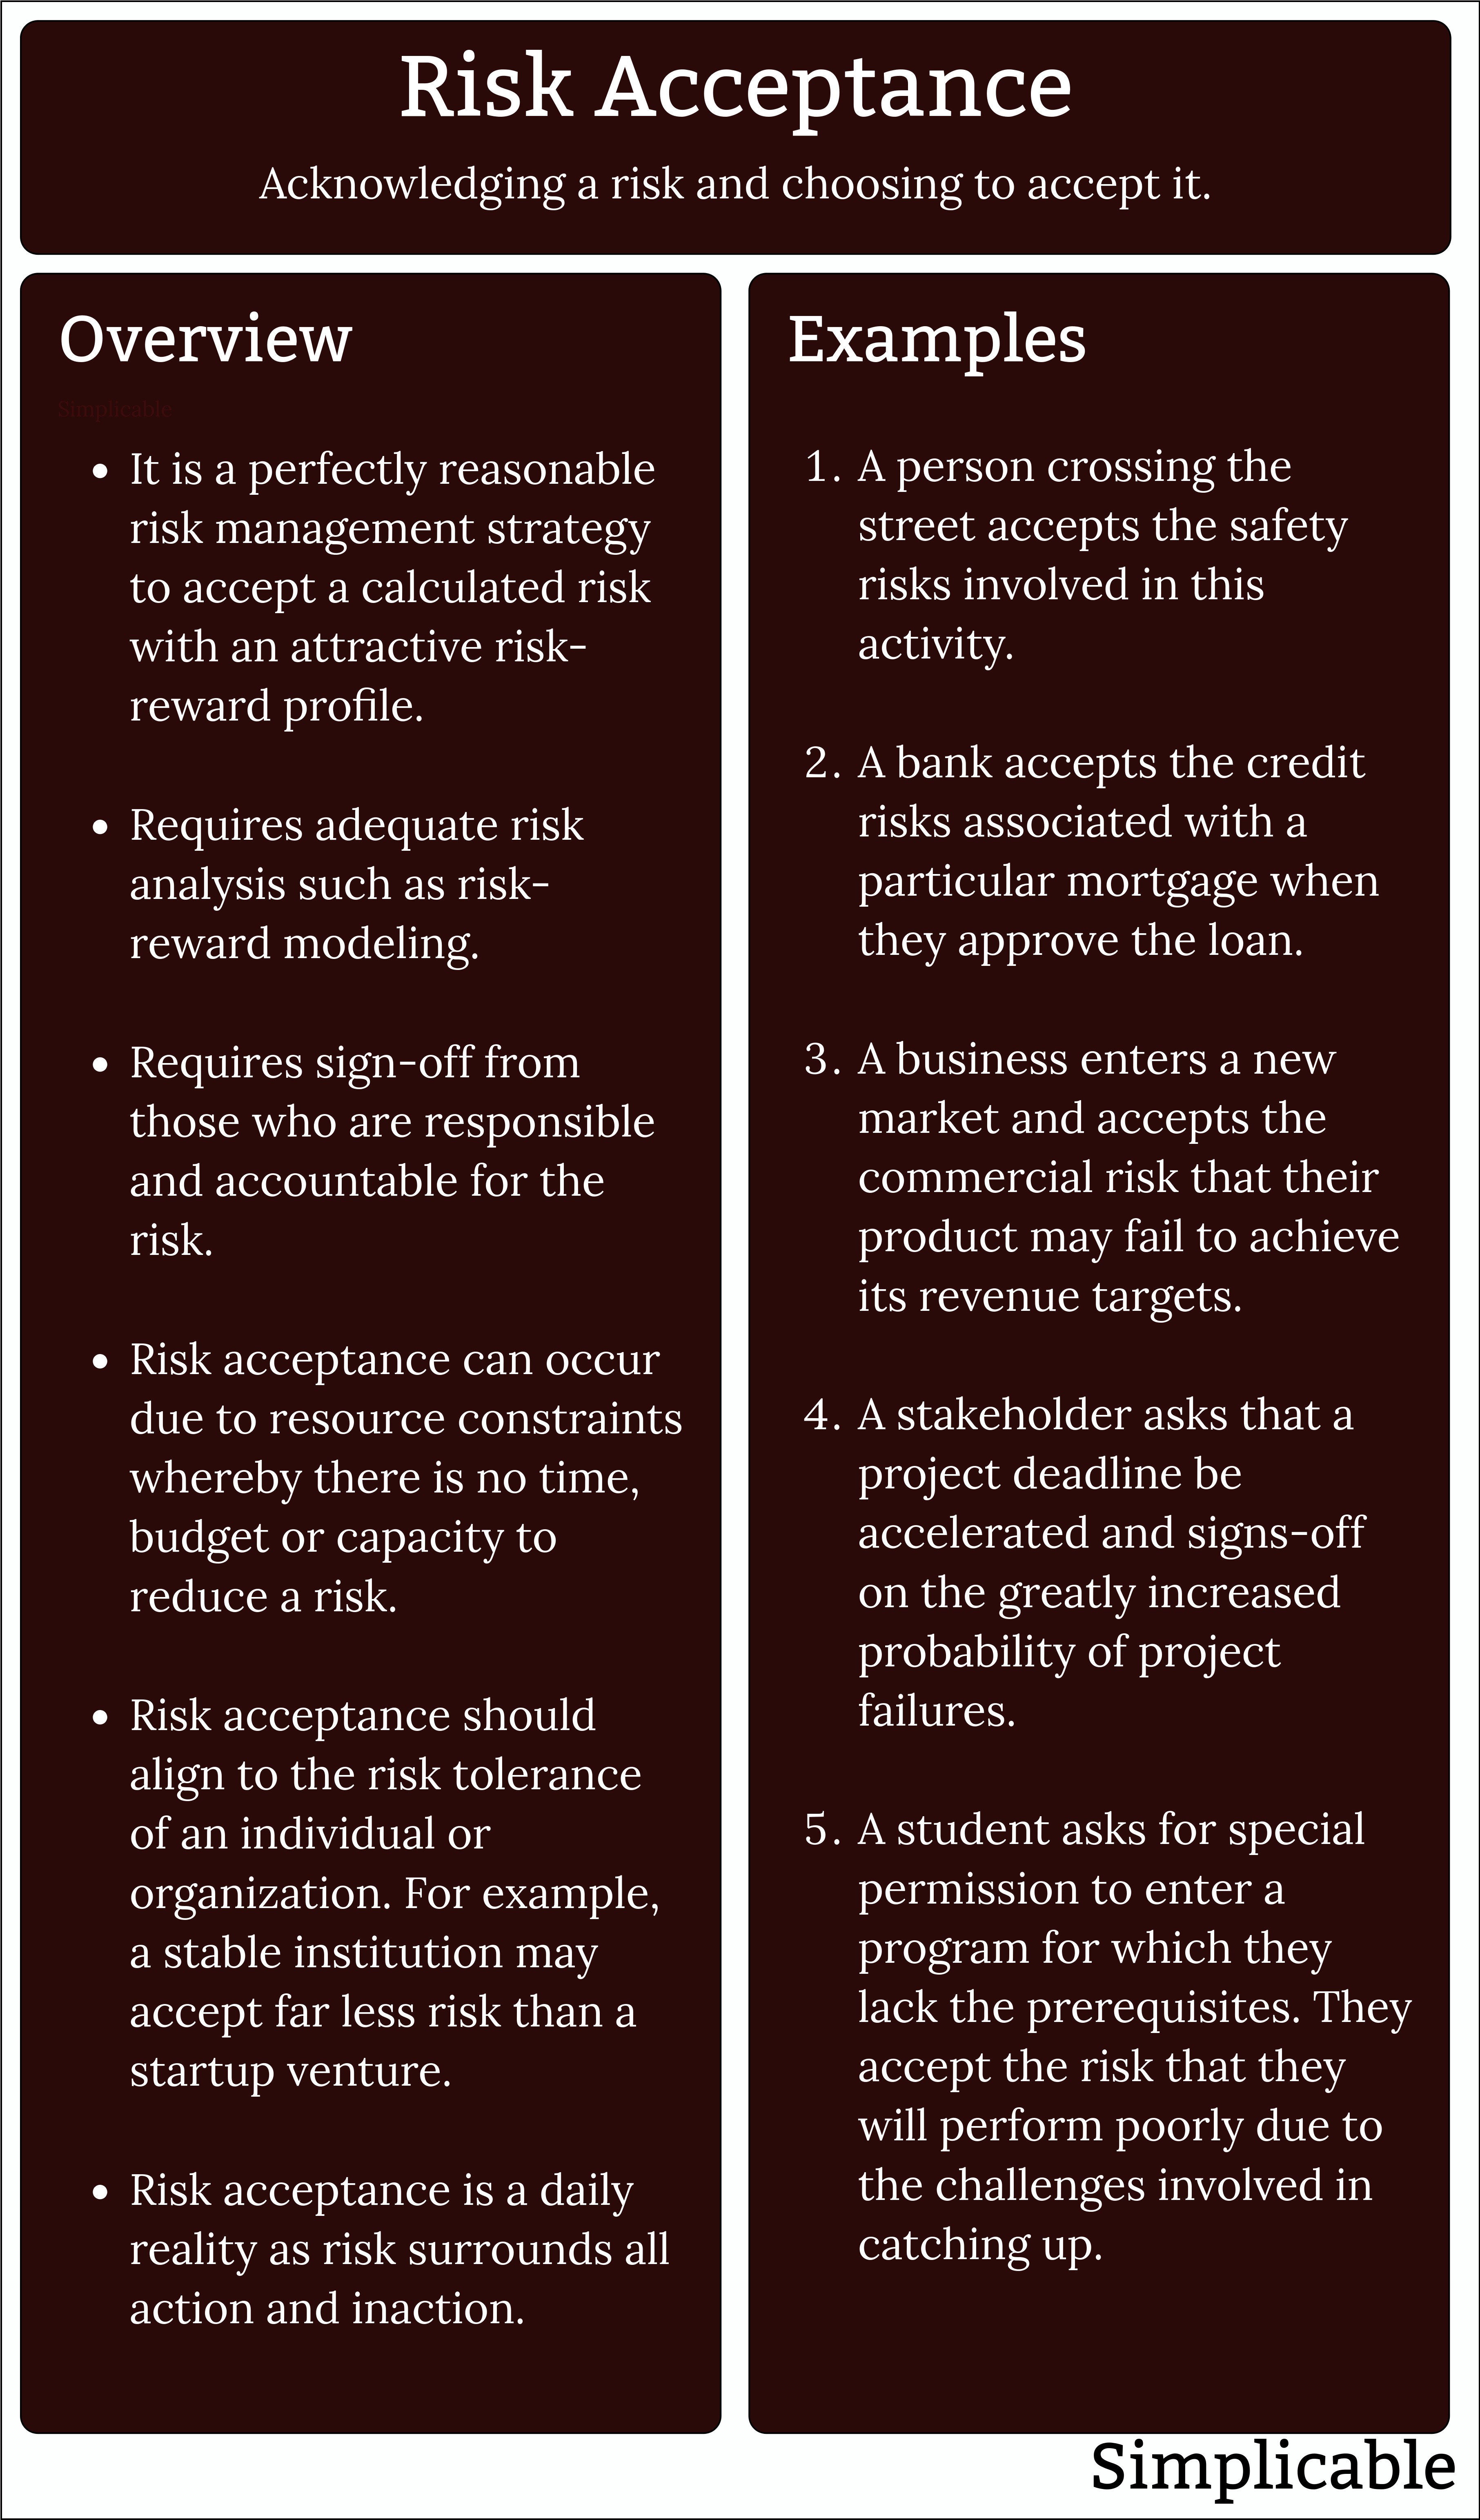 risk acceptance overview and examples